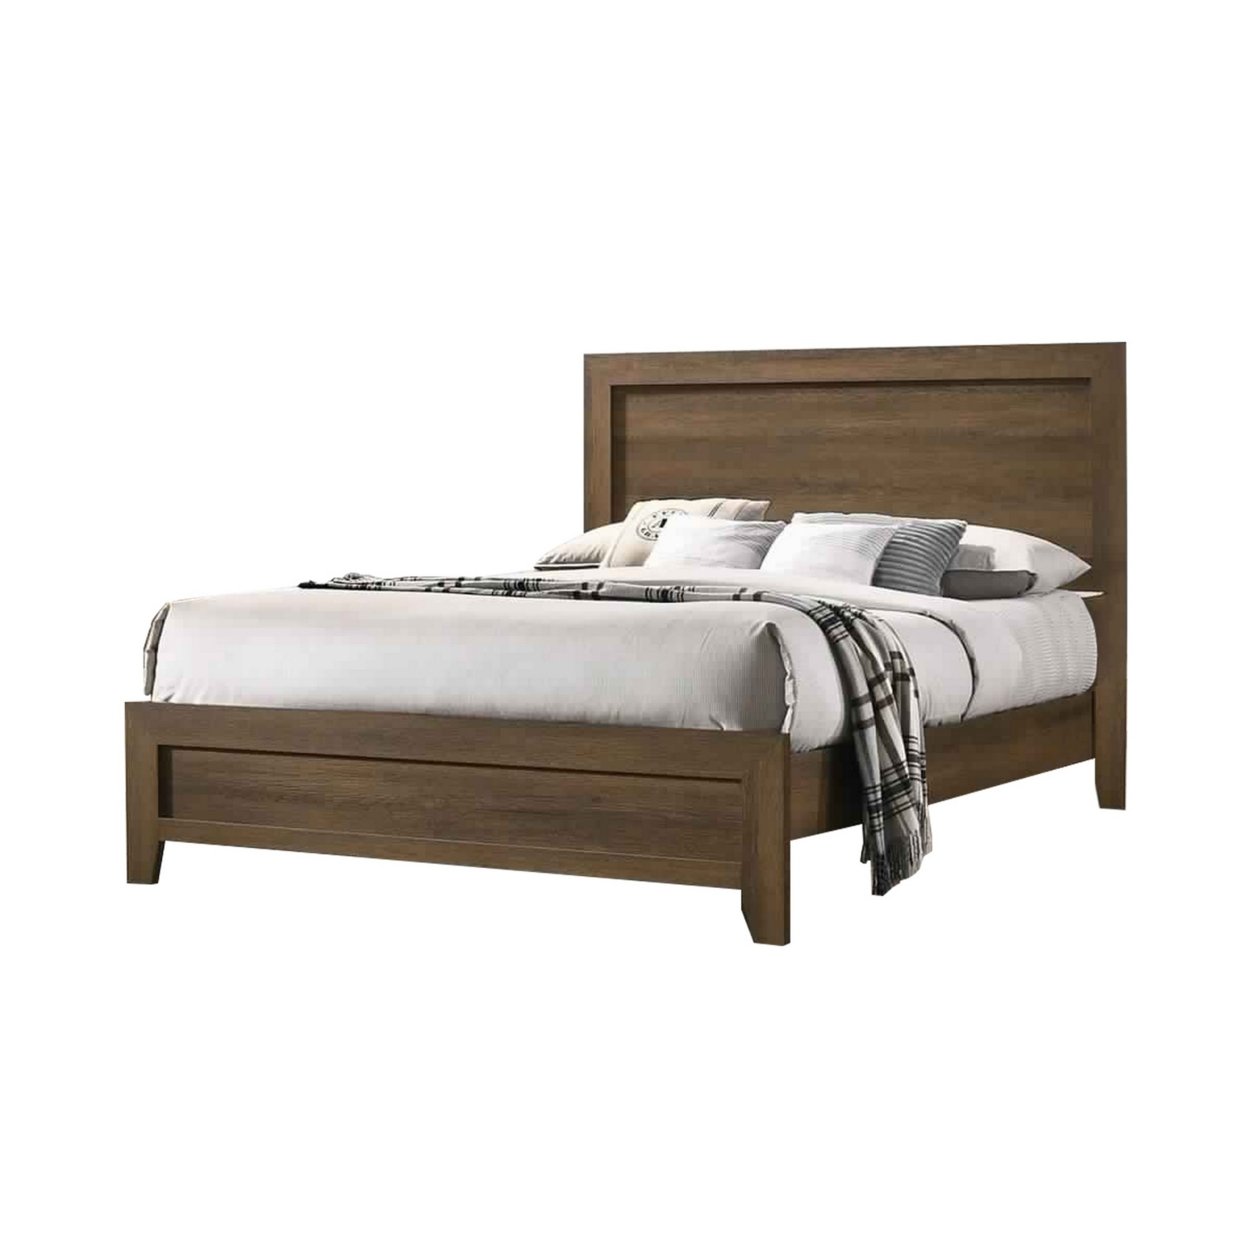 Transitional Style Wooden Eastern King Bed With Raised Molding Trim, Brown- Saltoro Sherpi